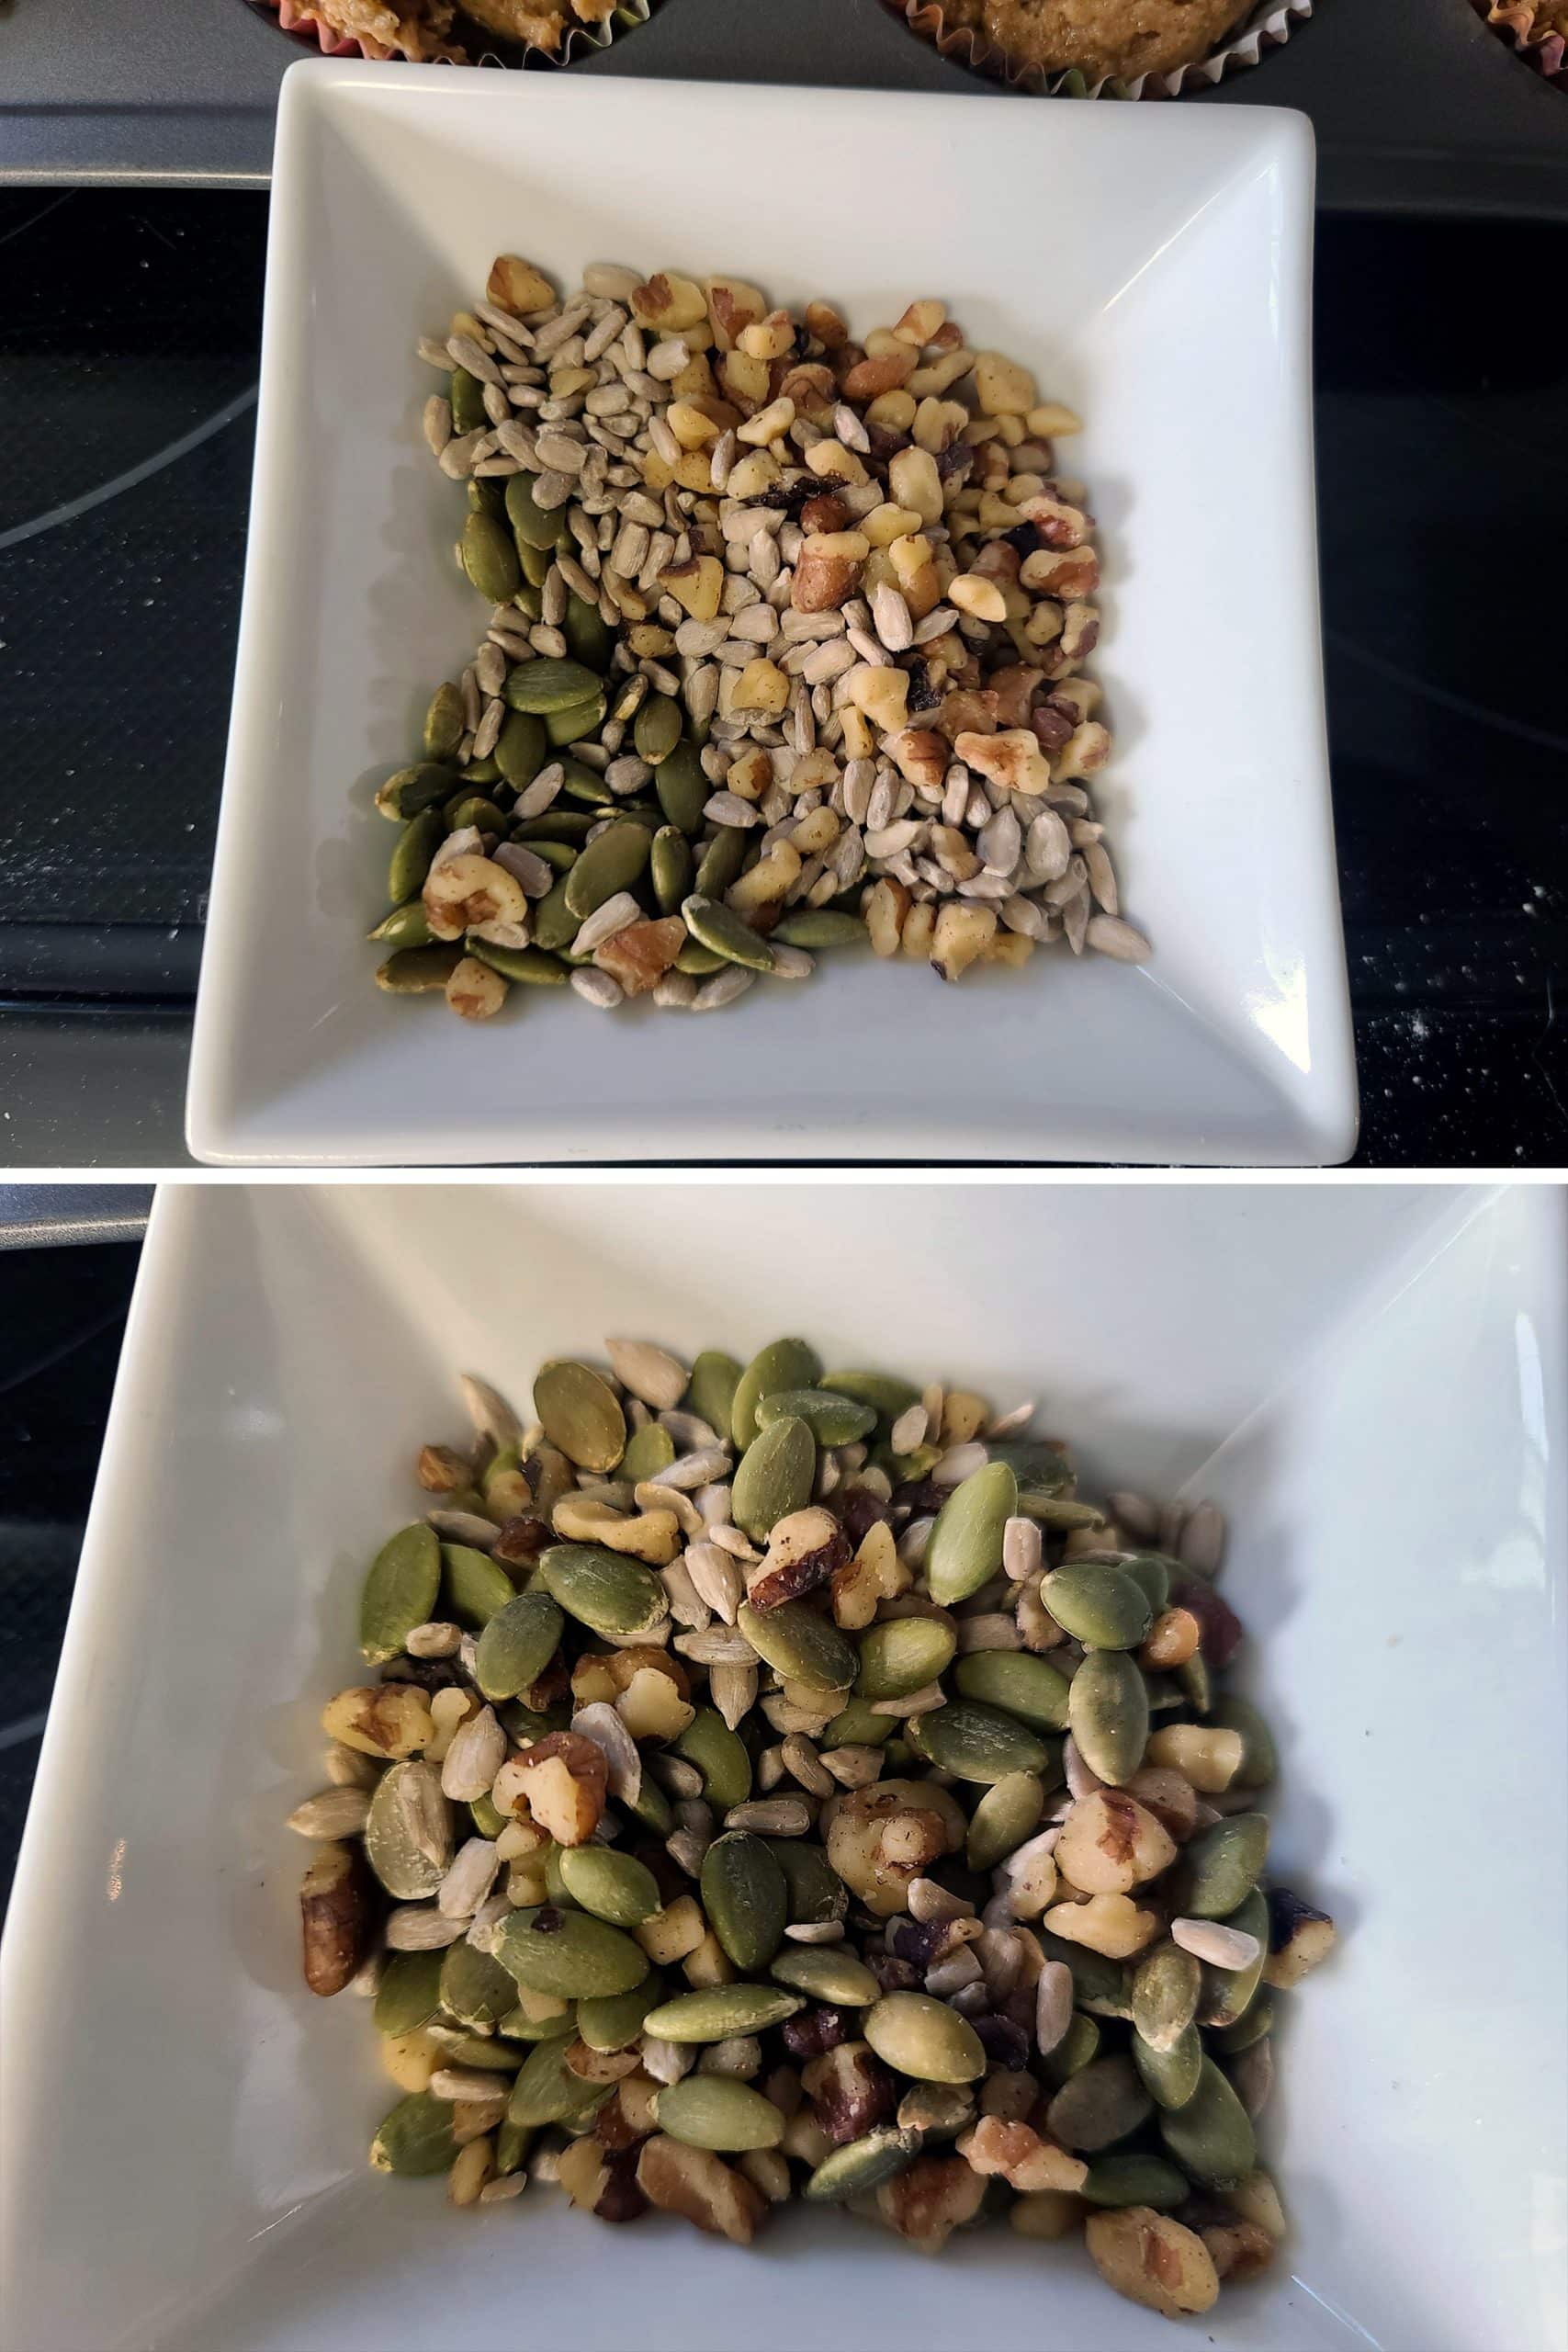 2 part image showing pepitas, walnuts, and sunflower seeds being mixed in a small bowl.